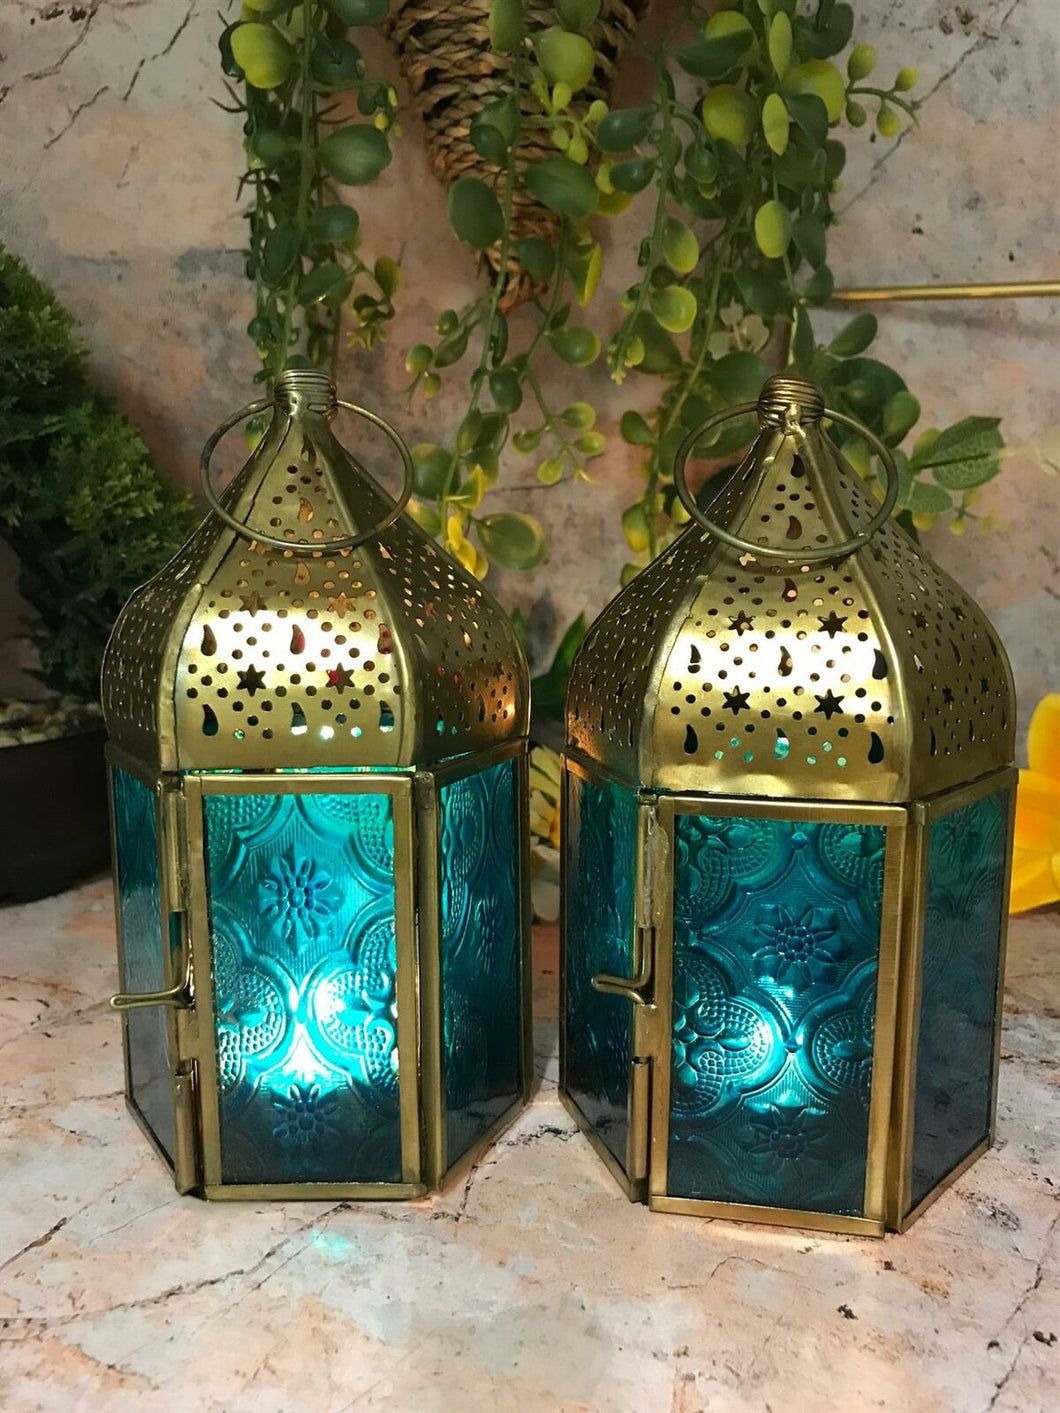 Set of Two Blue Glass Moroccan Style Lanterns Brass Candle Holders